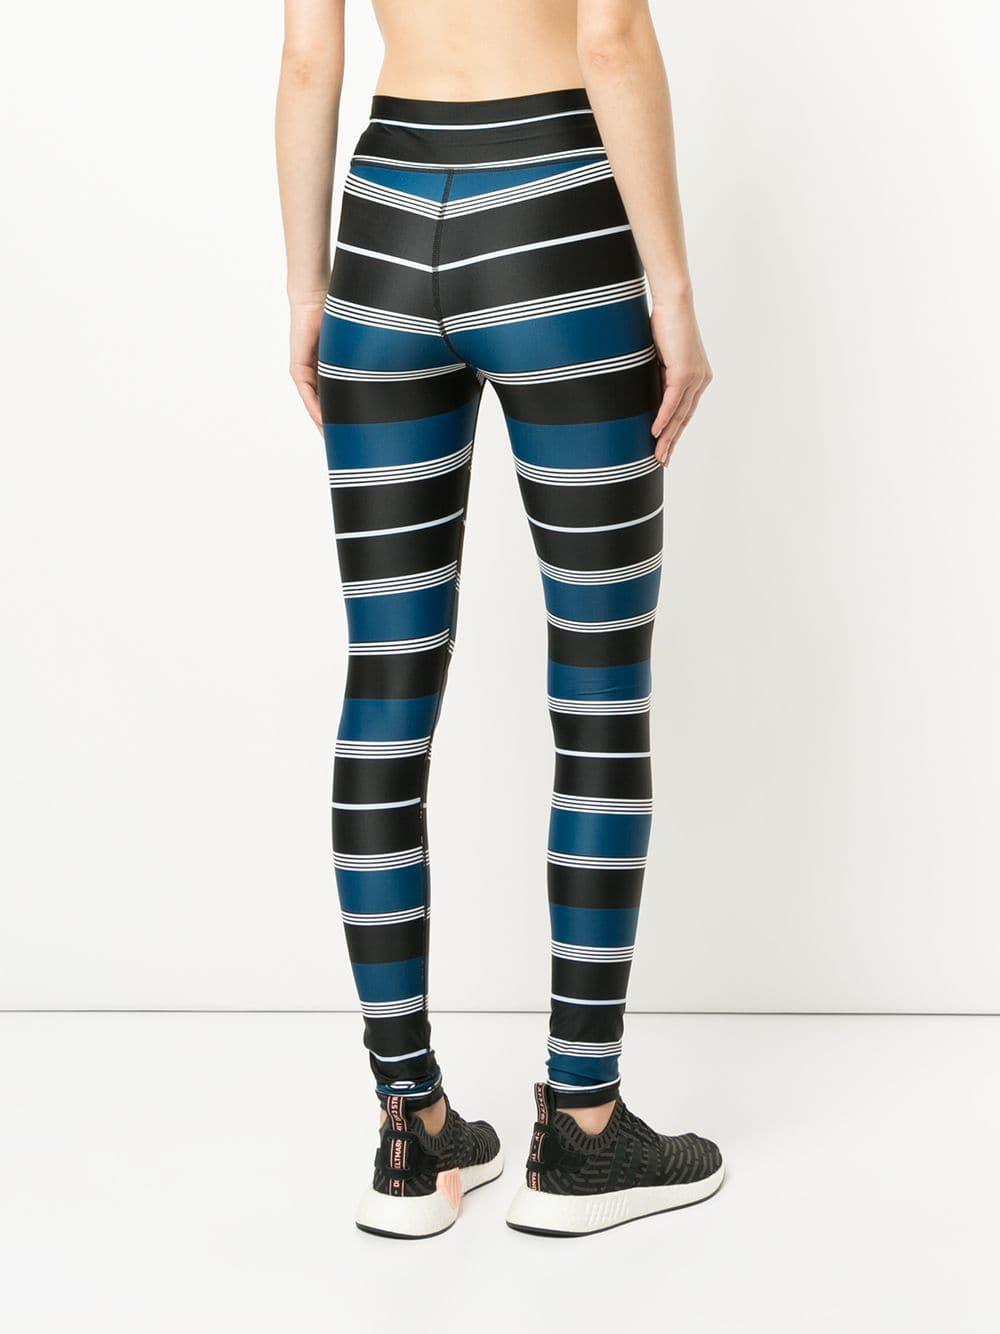 Upside Leggings Review  International Society of Precision Agriculture